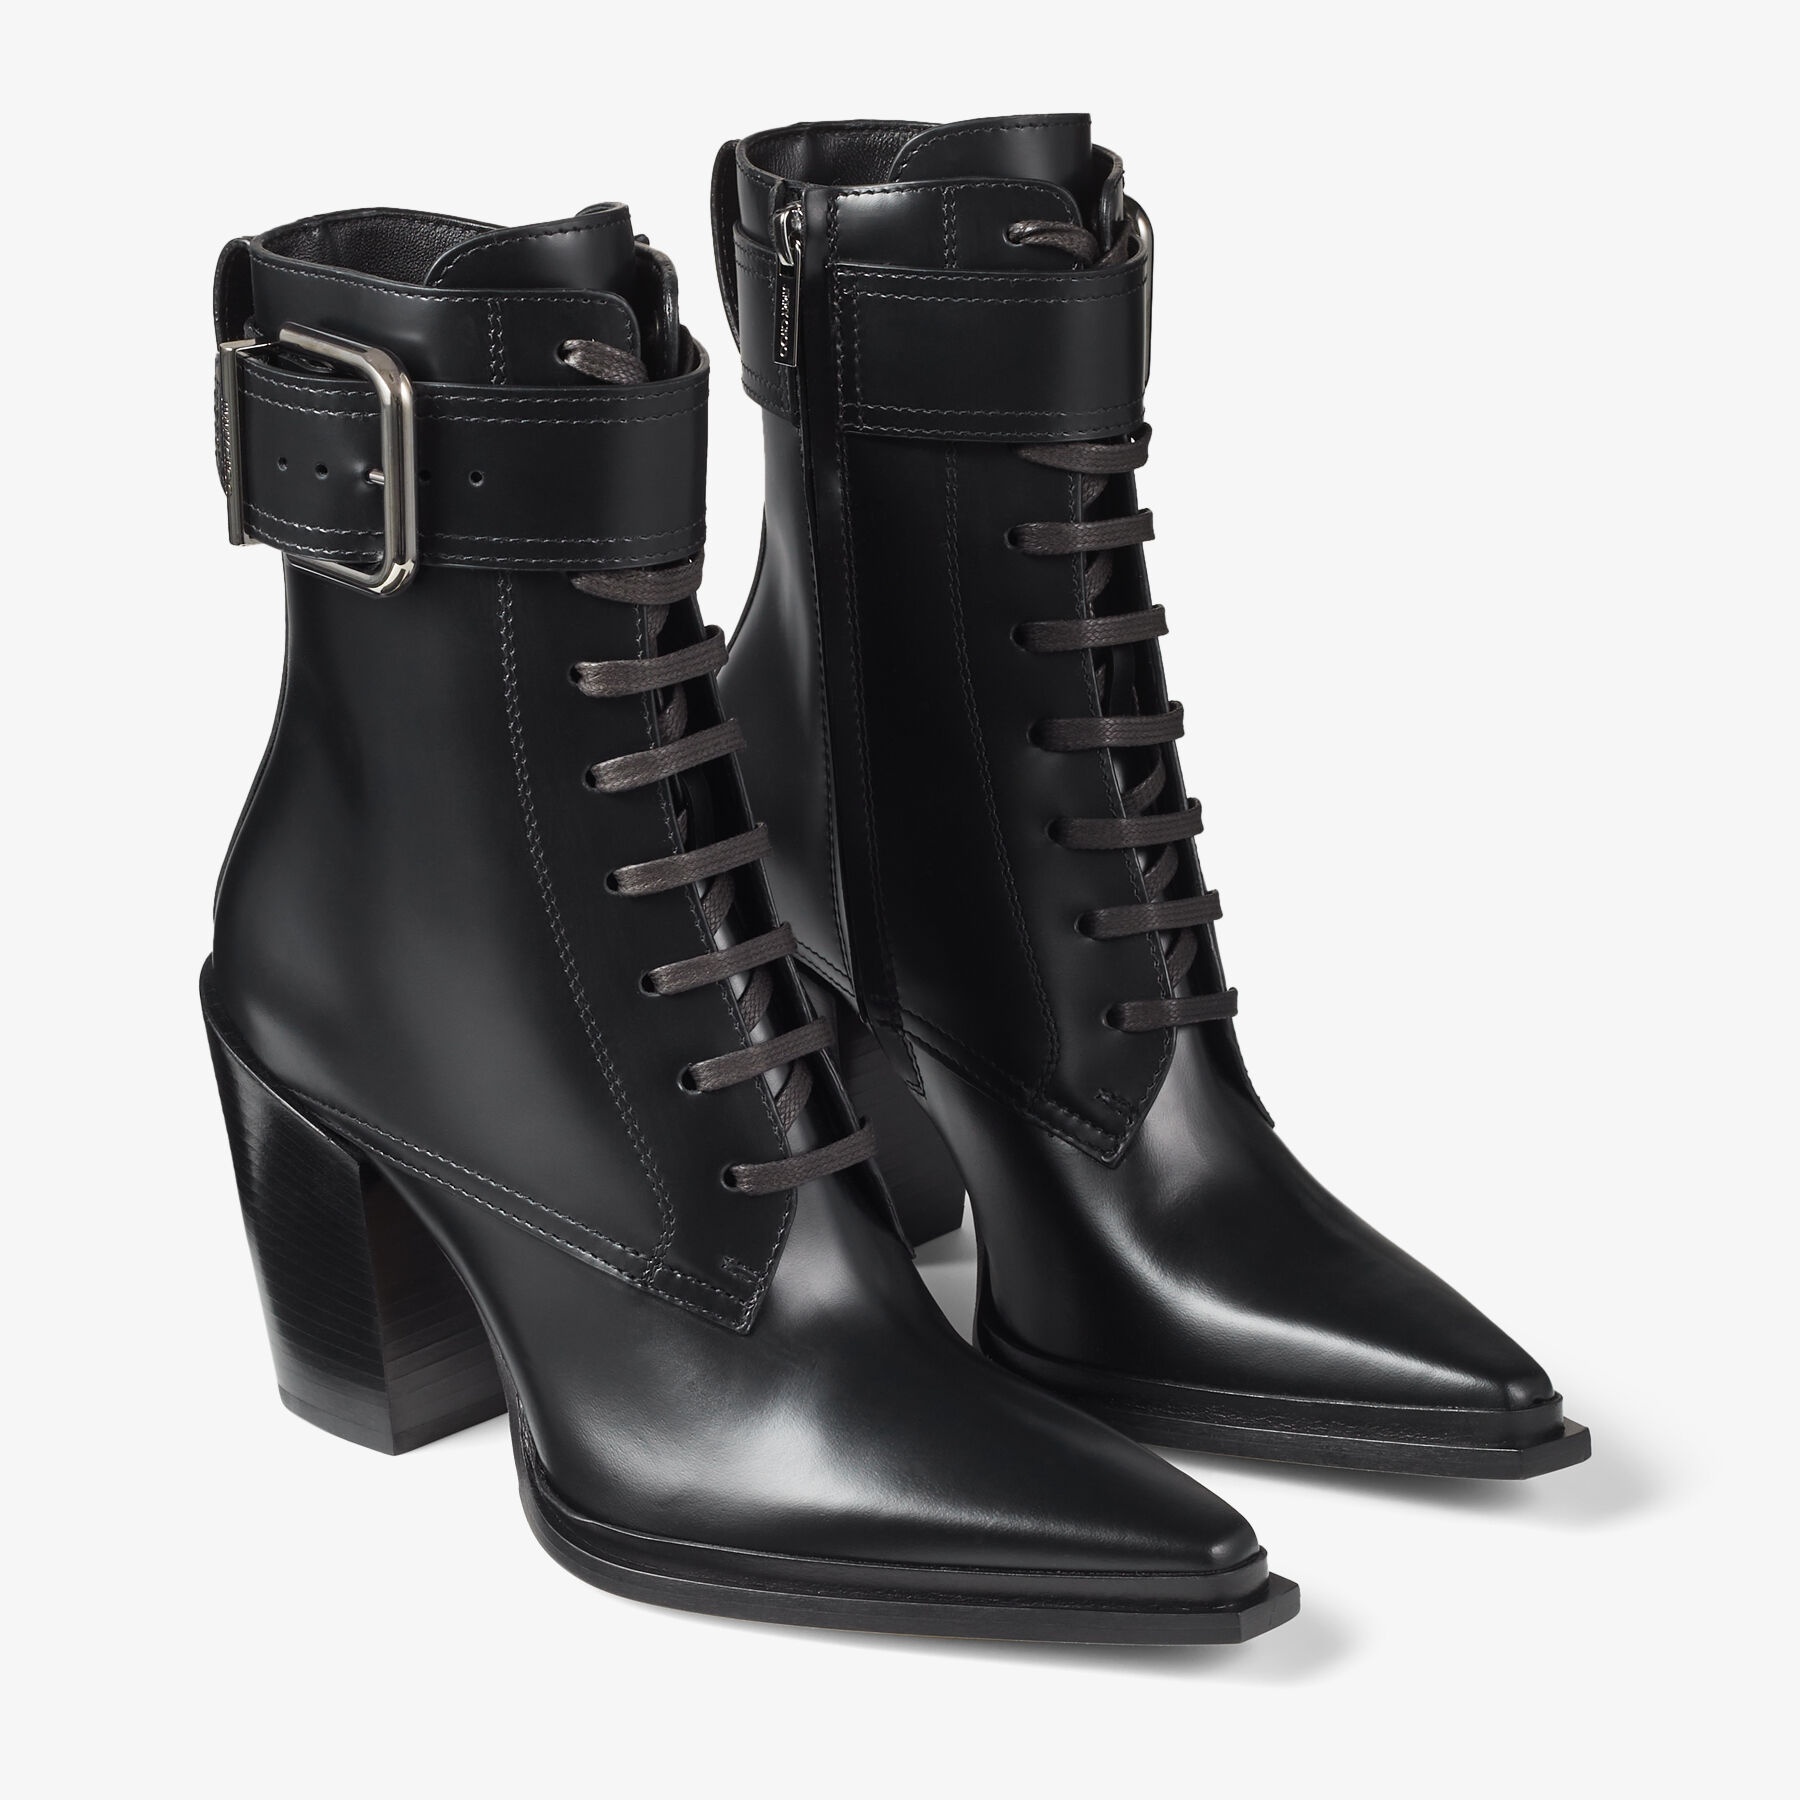 Myos 80
Black Brushed Calf Leather Ankle Boots - 3